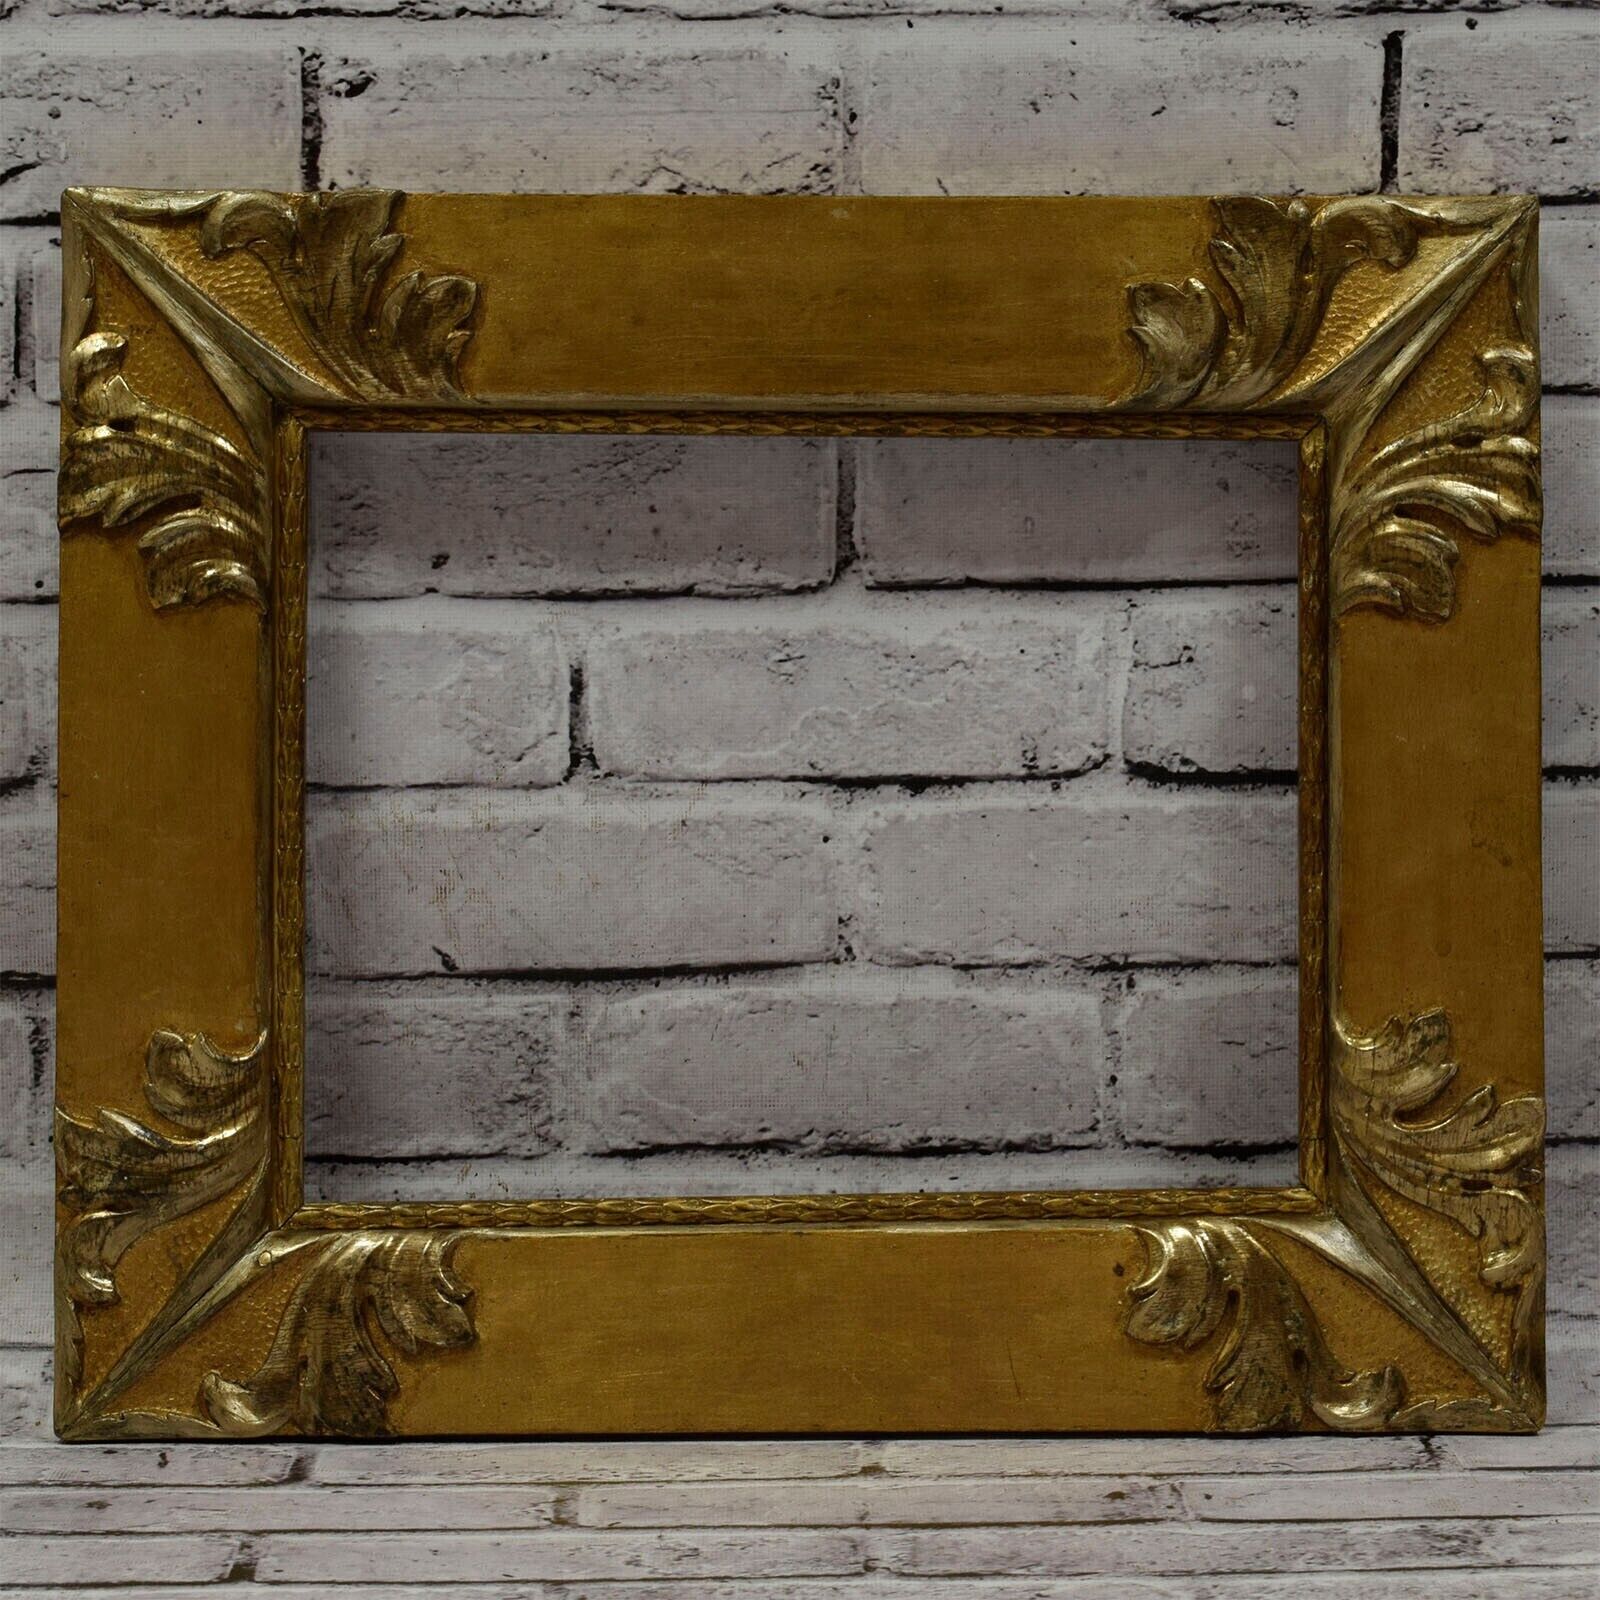 1906 old wooden frame decorative corners in original condition 13.2 x 10.4 in